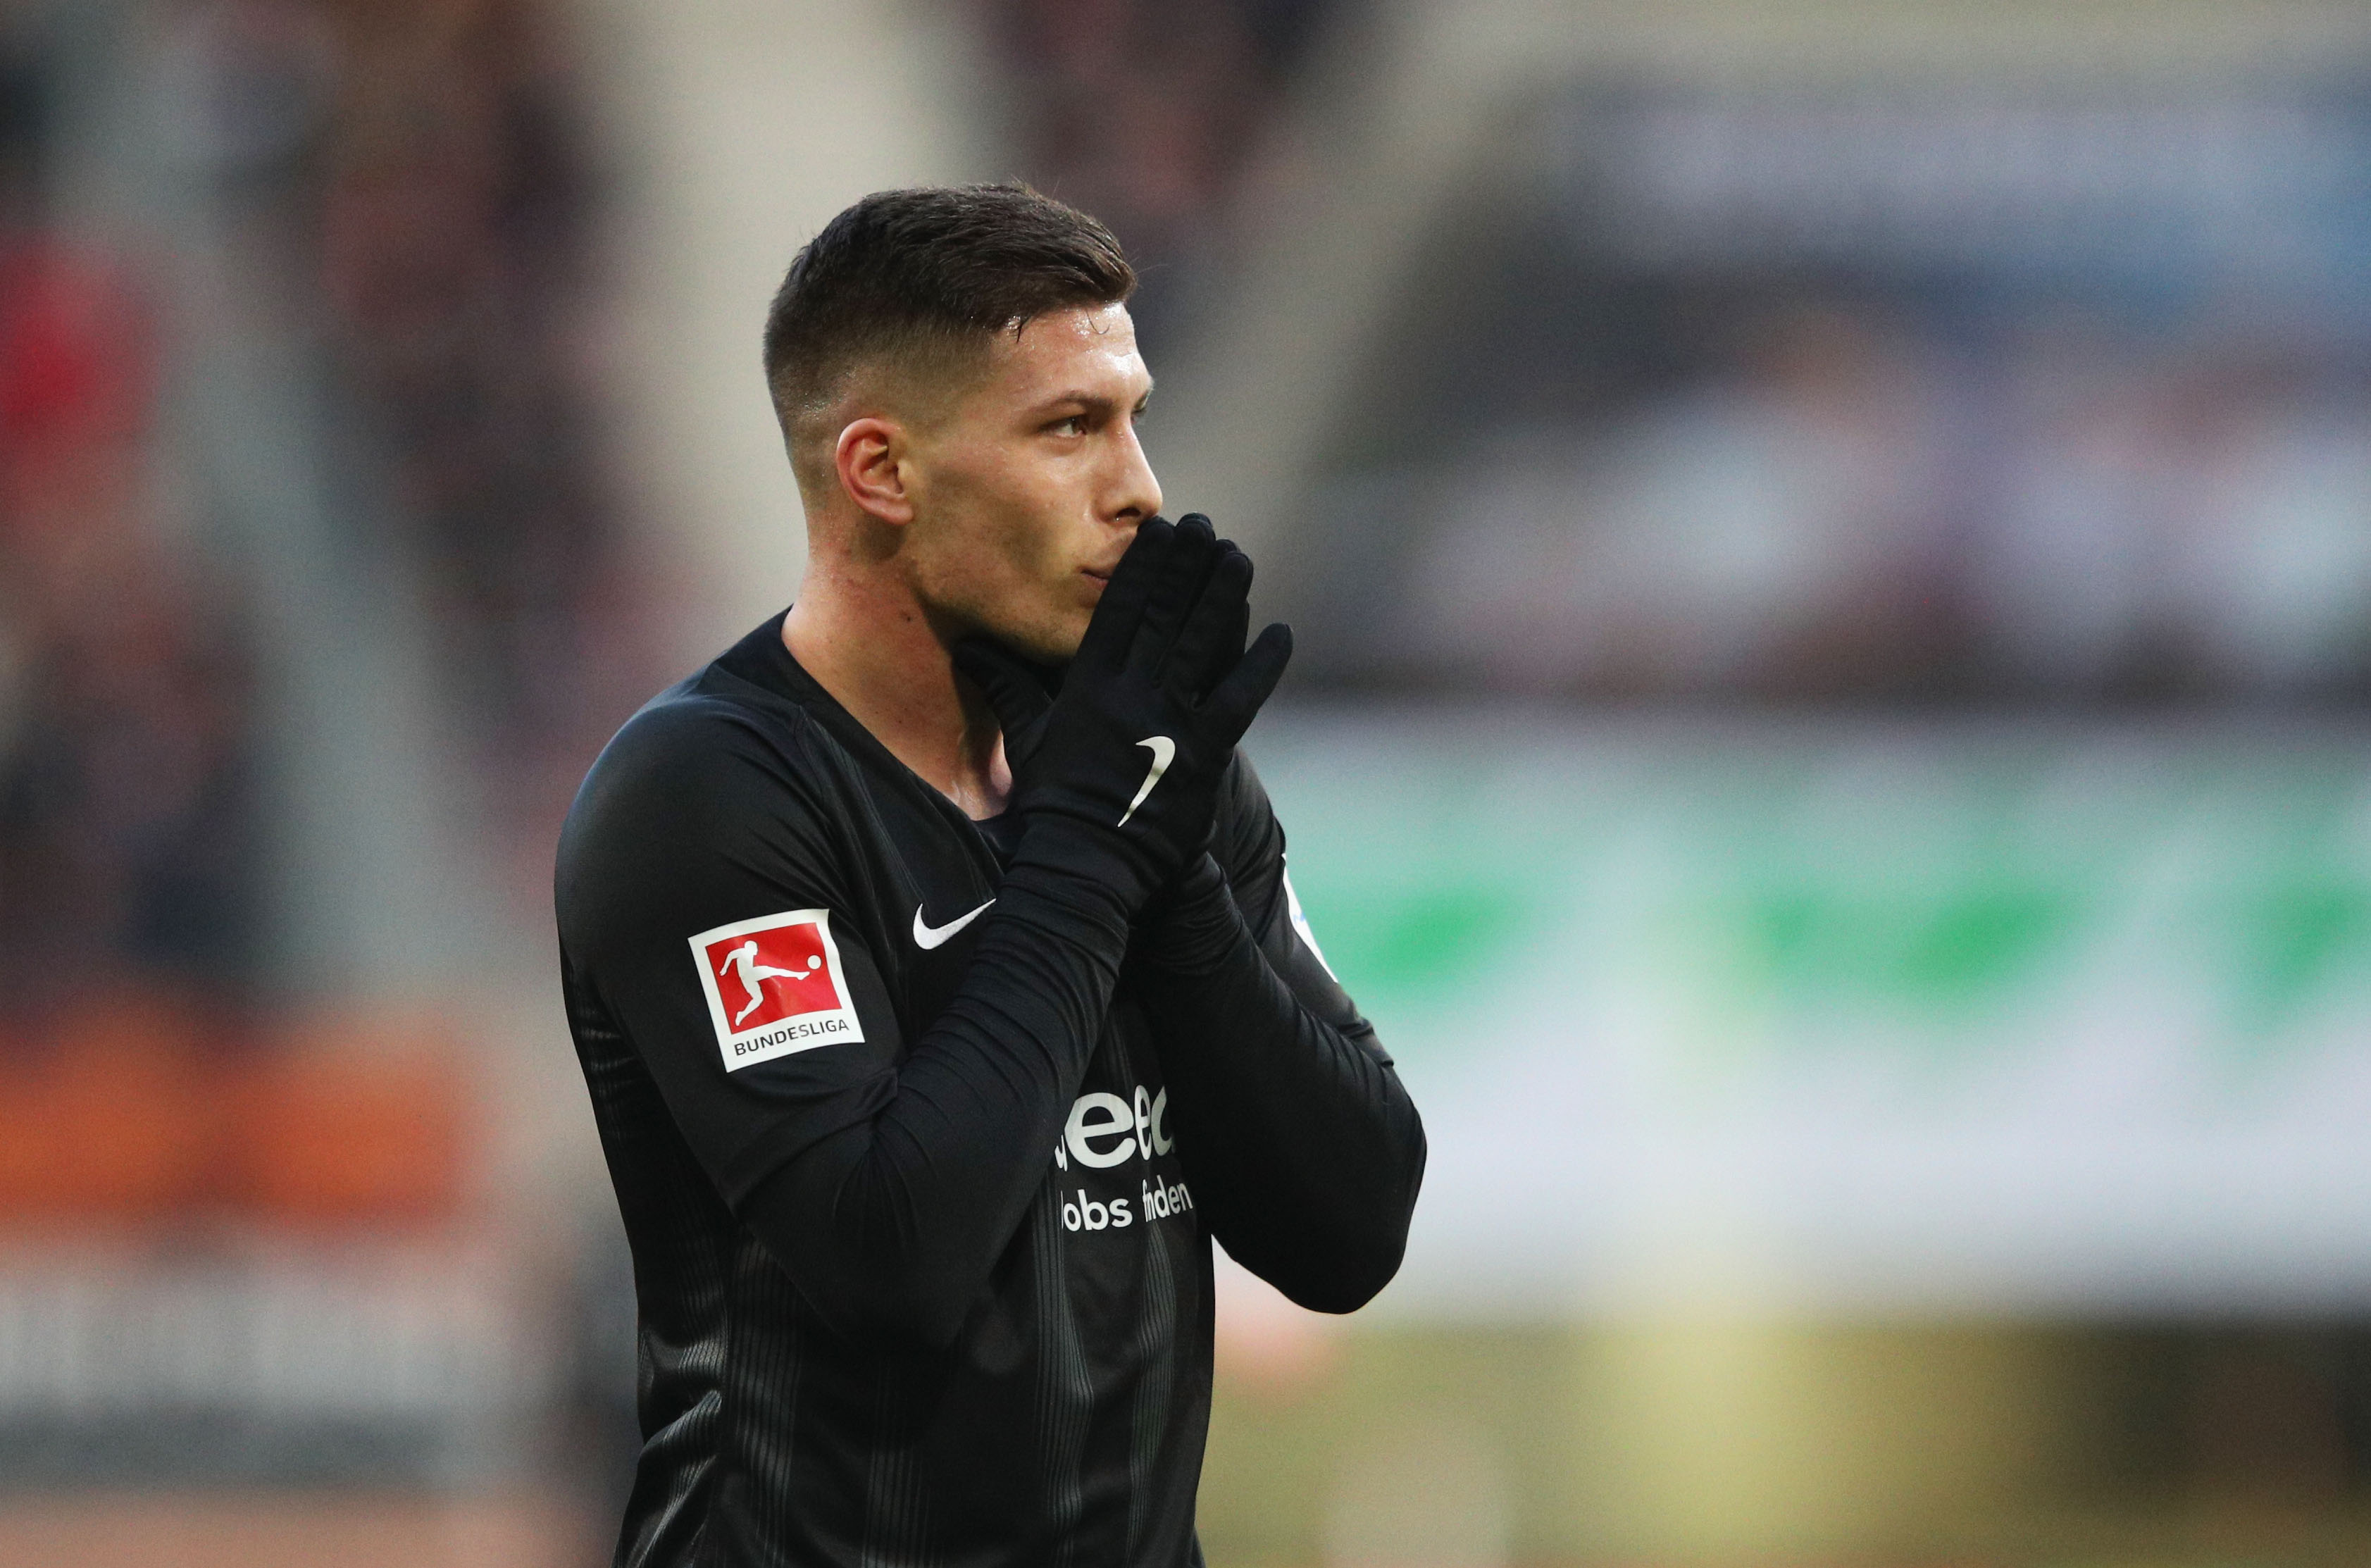 AUGSBURG, GERMANY - NOVEMBER 24:  Luka Jovic of Eintracht Frankfurt reacts after missing a clear chance on goal during the Bundesliga match between FC Augsburg and Eintracht Frankfurt at WWK-Arena on November 24, 2018 in Augsburg, Germany.  (Photo by Adam Pretty/Bongarts/Getty Images)